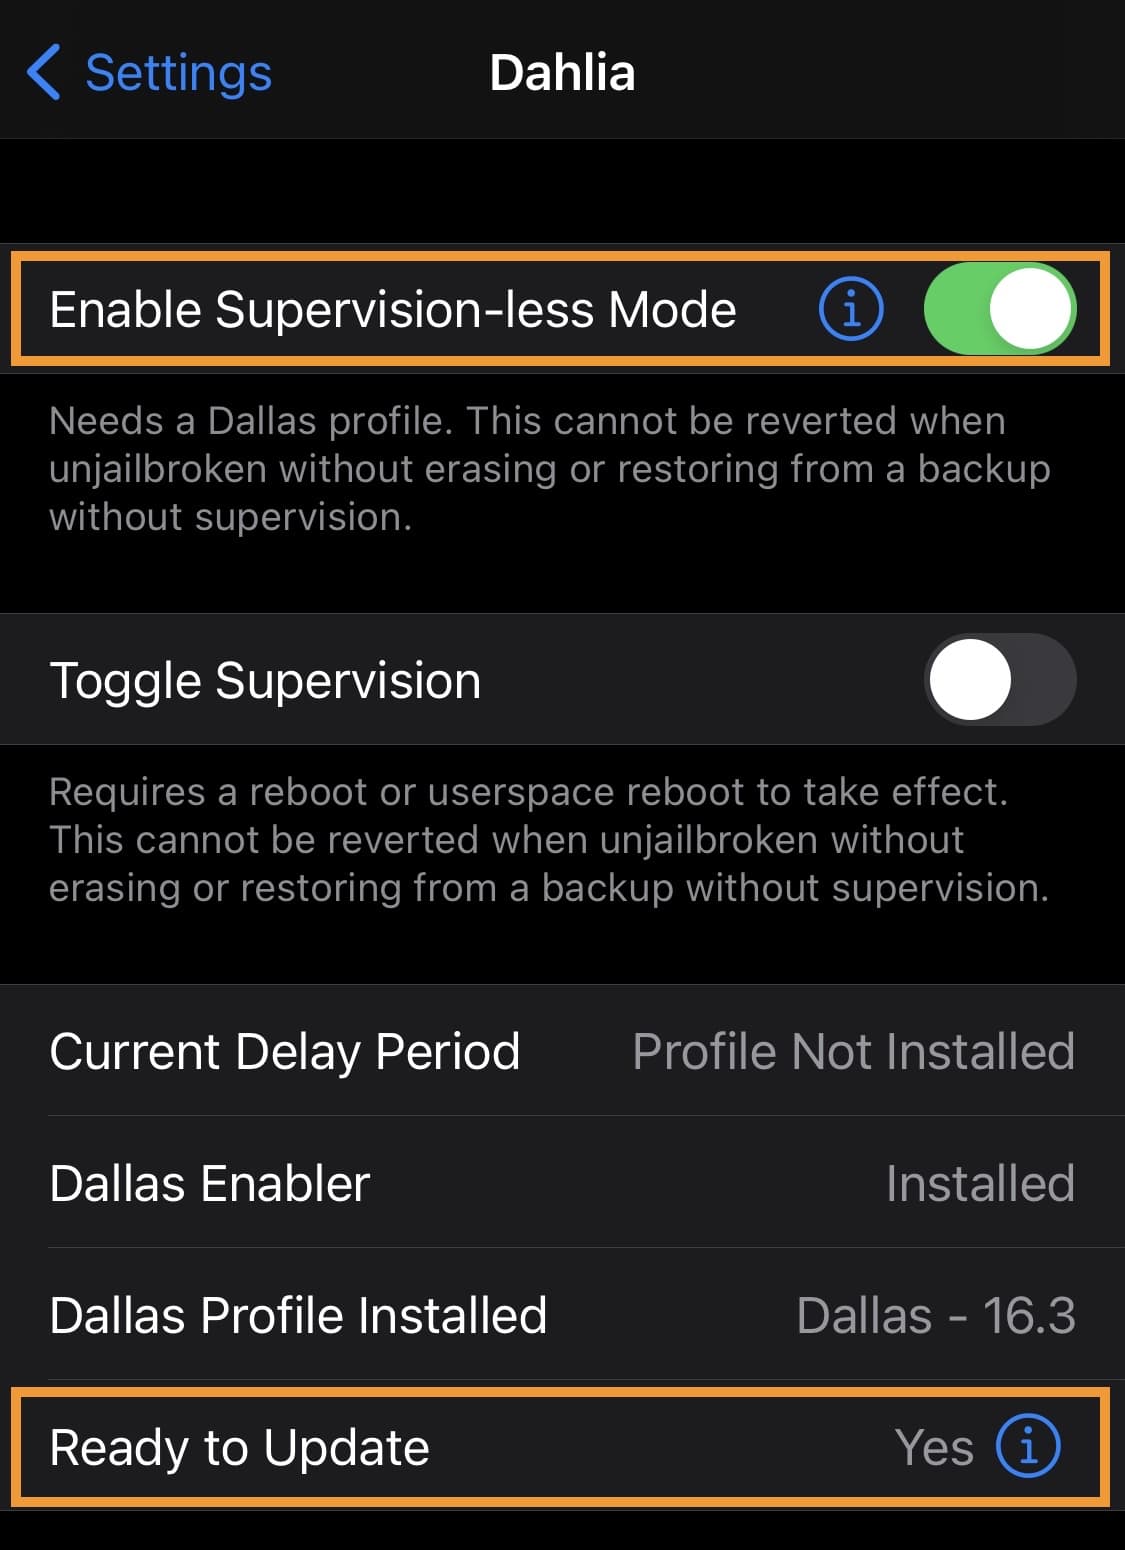 Enable Supervision-Less Mode.